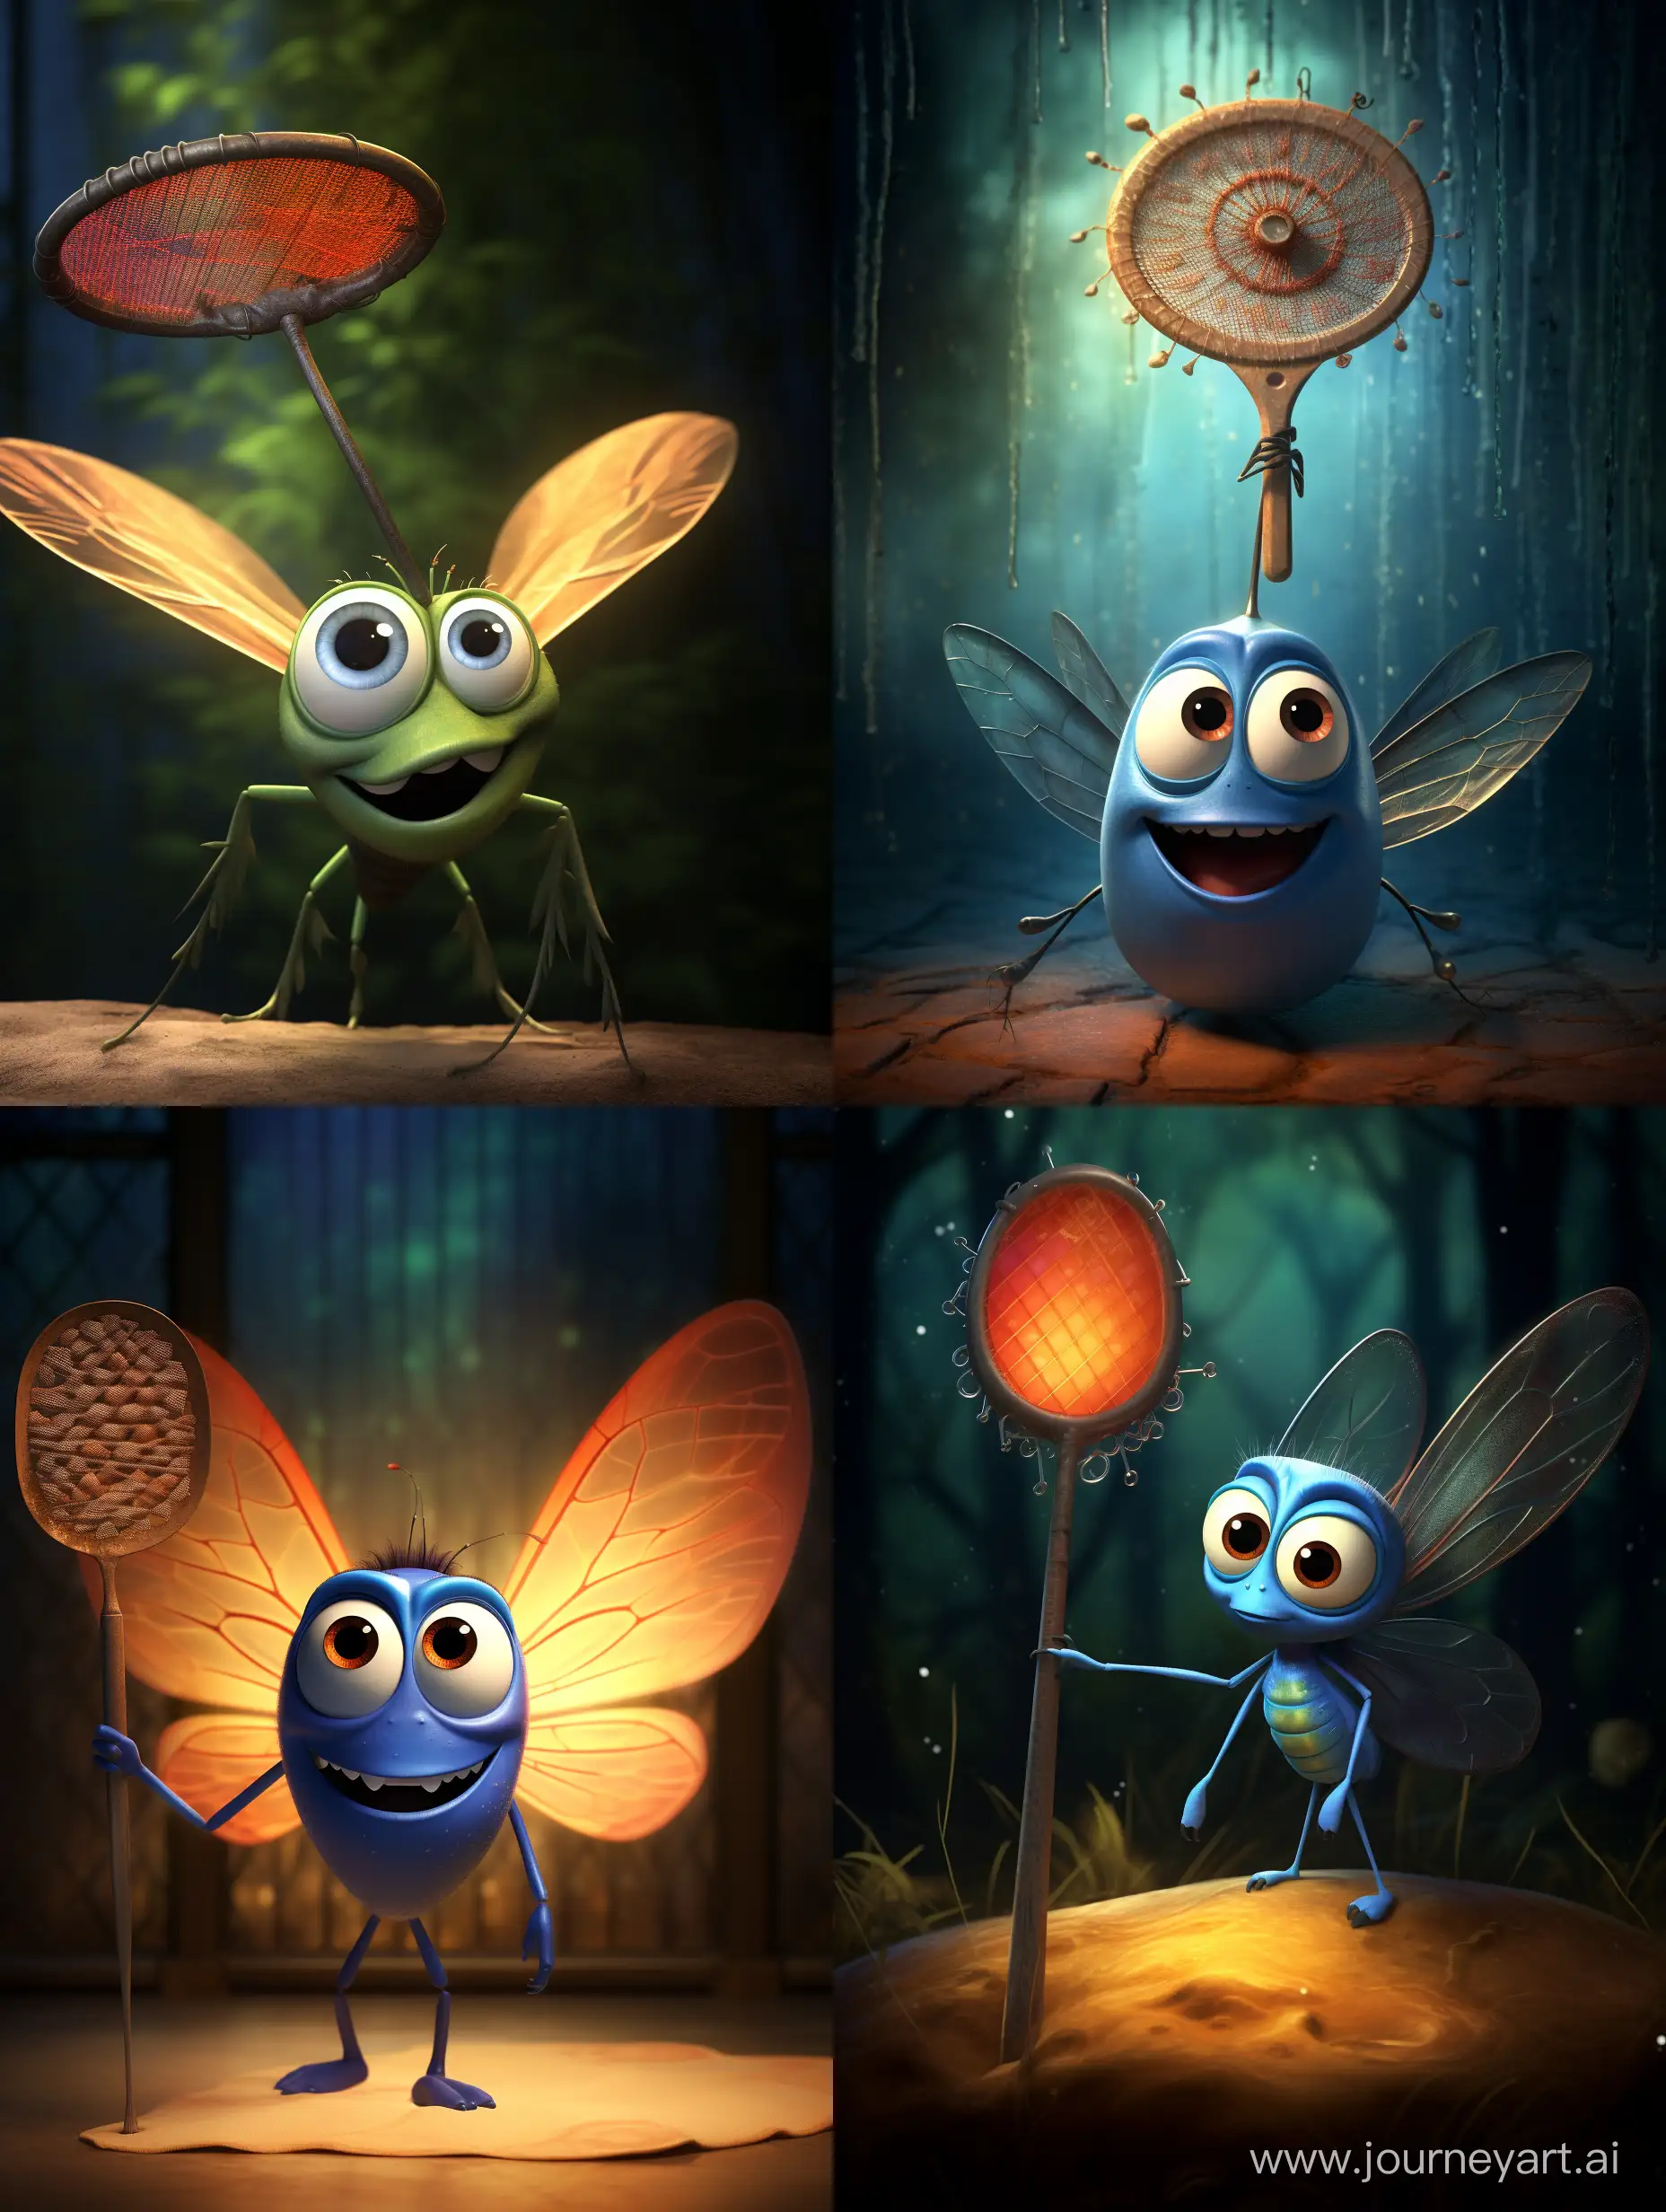 Playful-PixarStyle-Fly-Evasion-with-Fly-Swatter